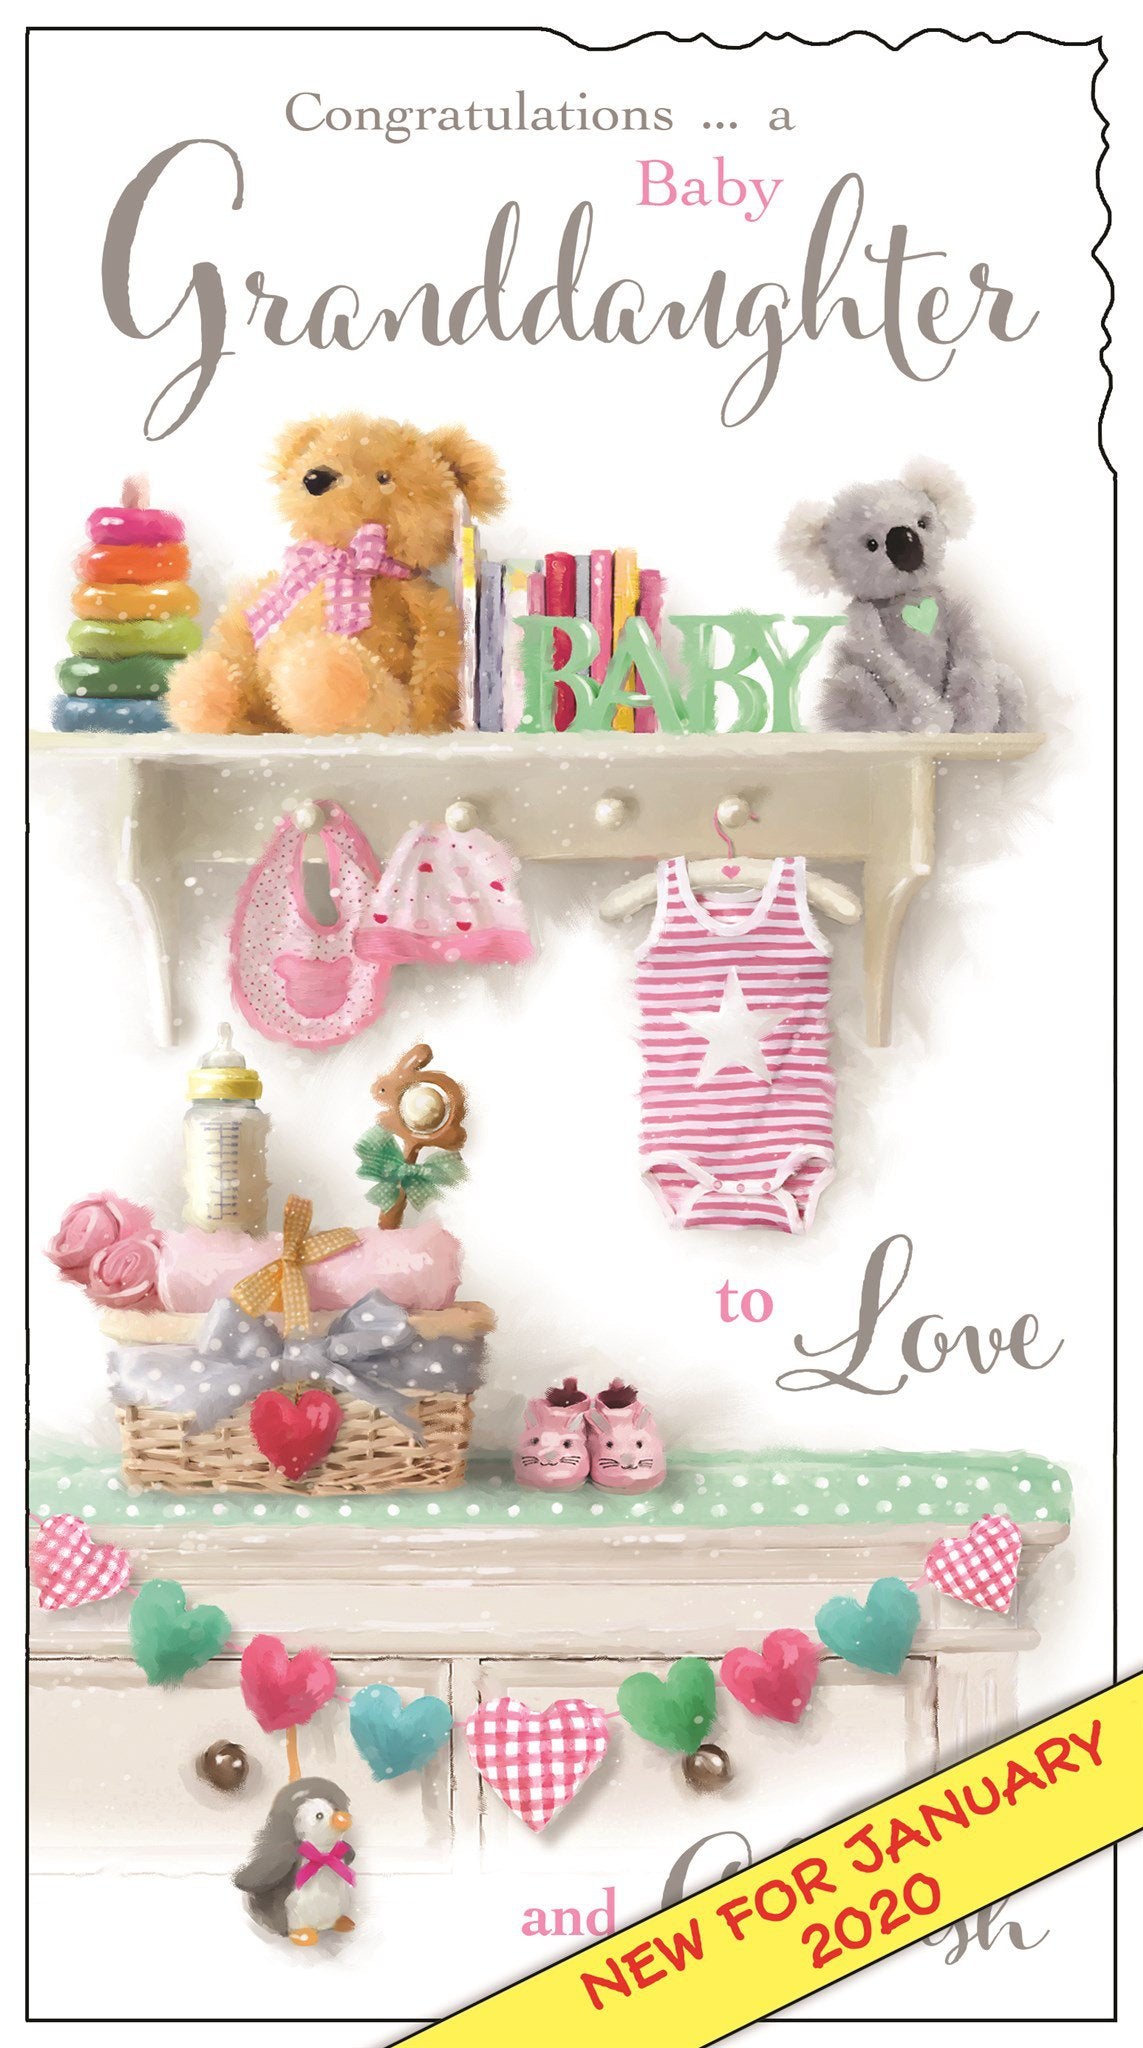 Front of Congrats New Granddaughter Shelf Greetings Card